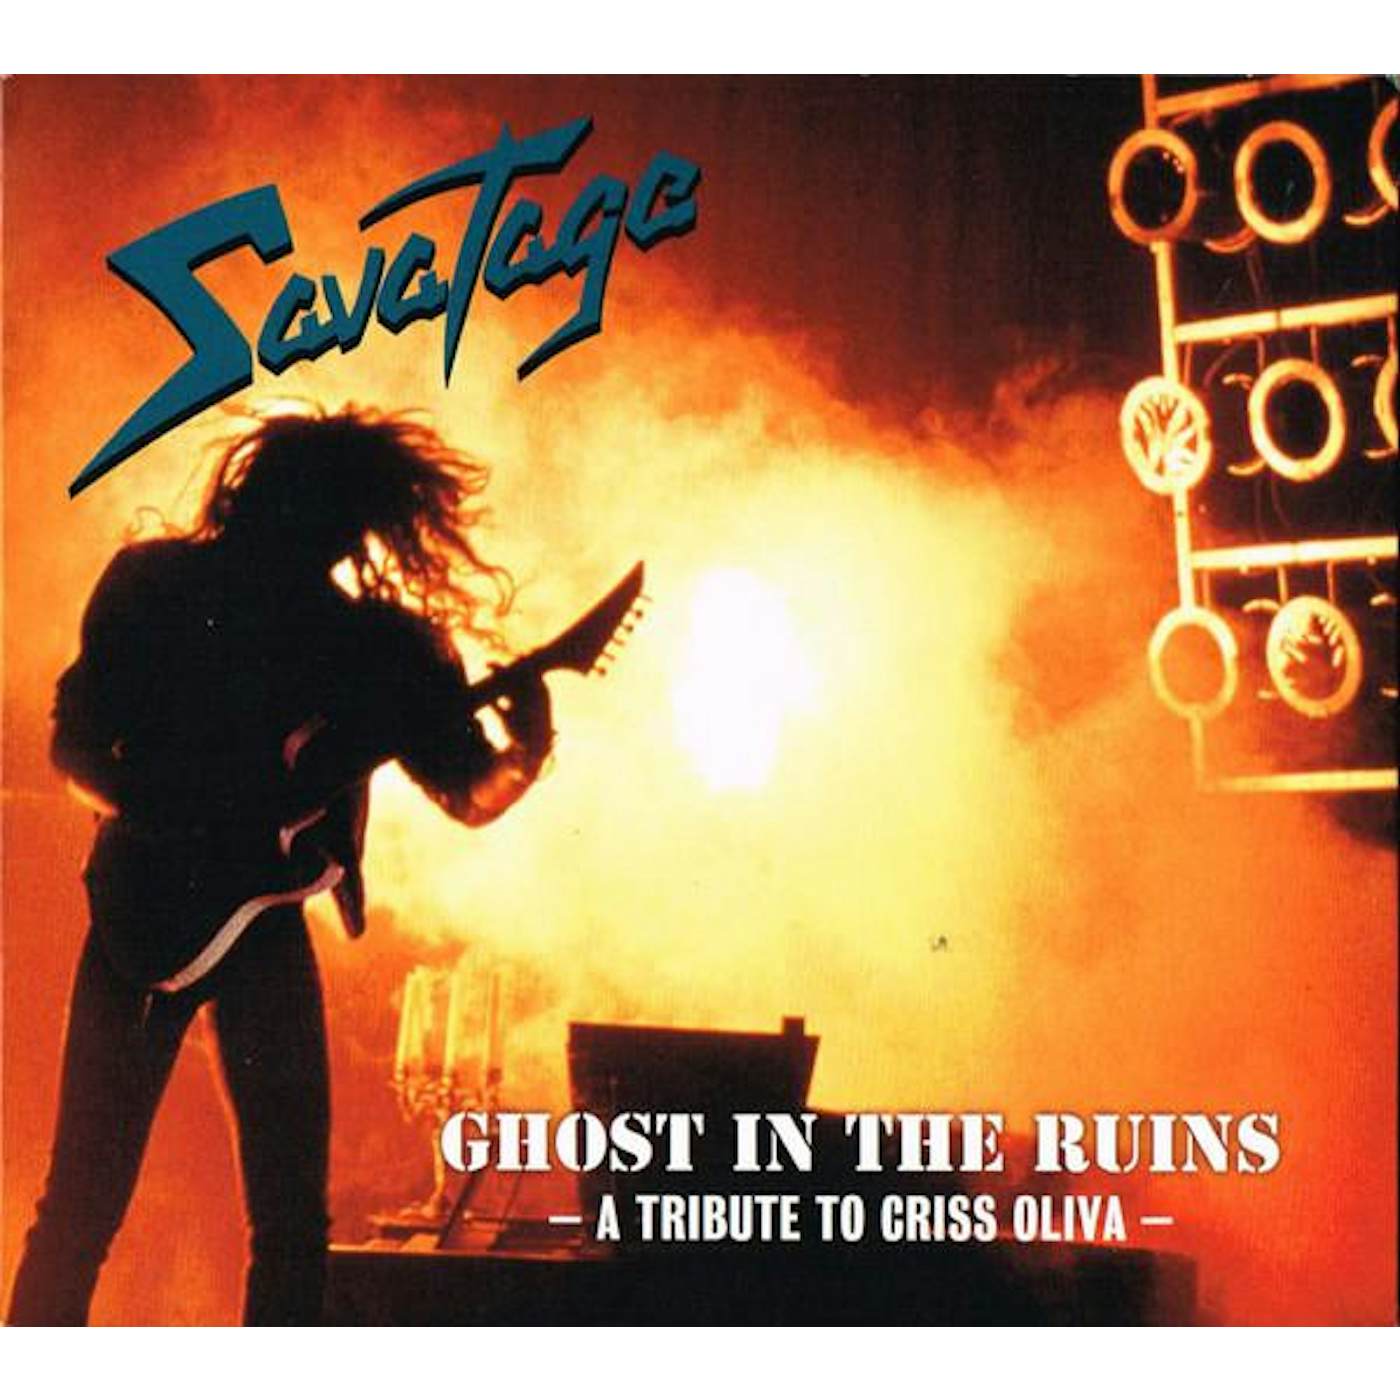 Savatage GHOST IN THE RUINS CD